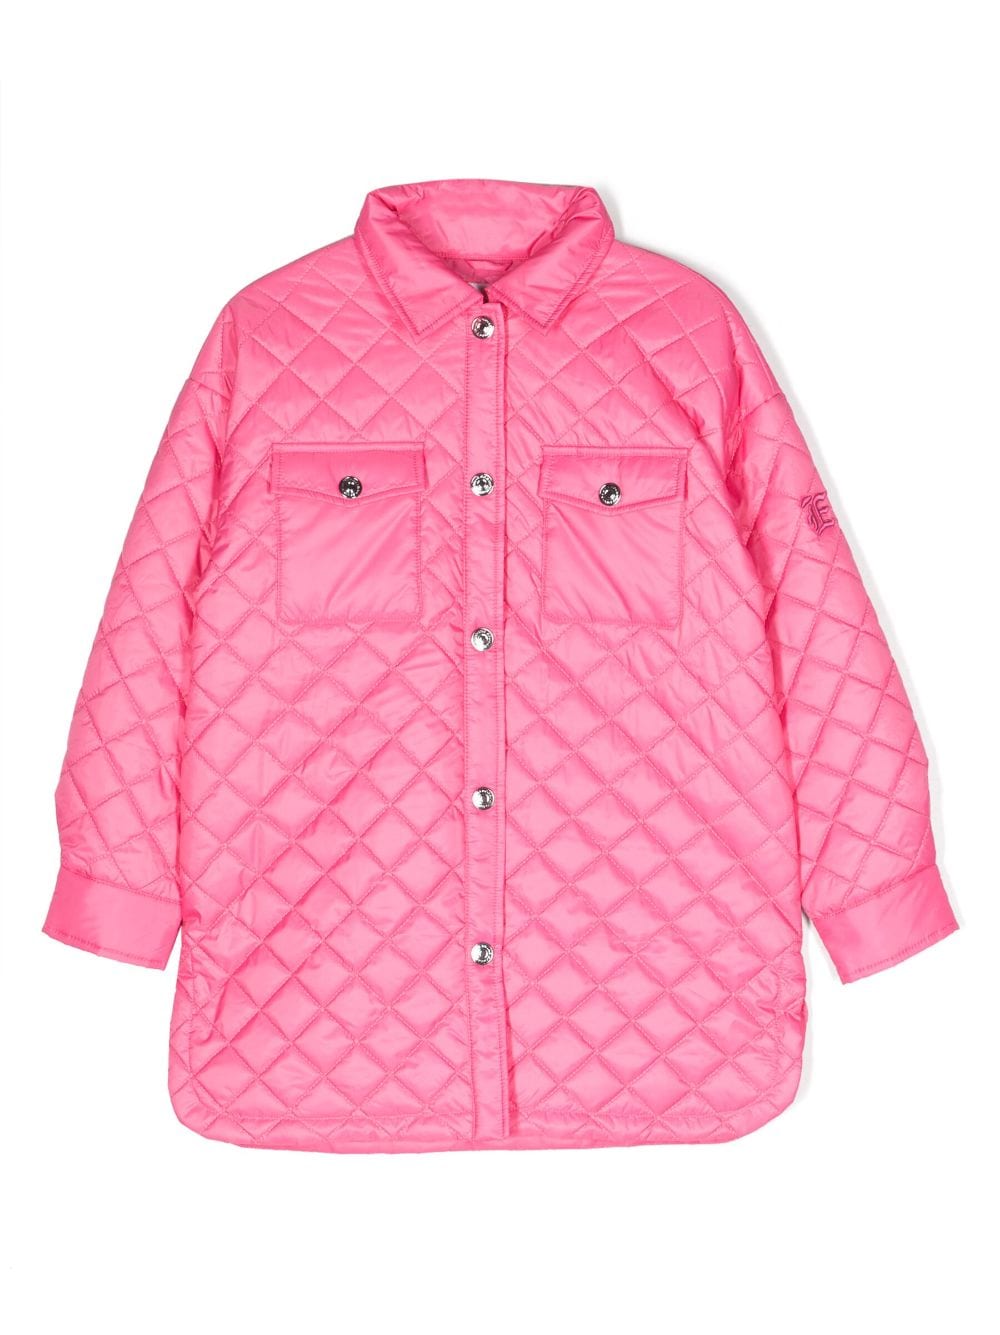 Classic Pink Quilted Jacket